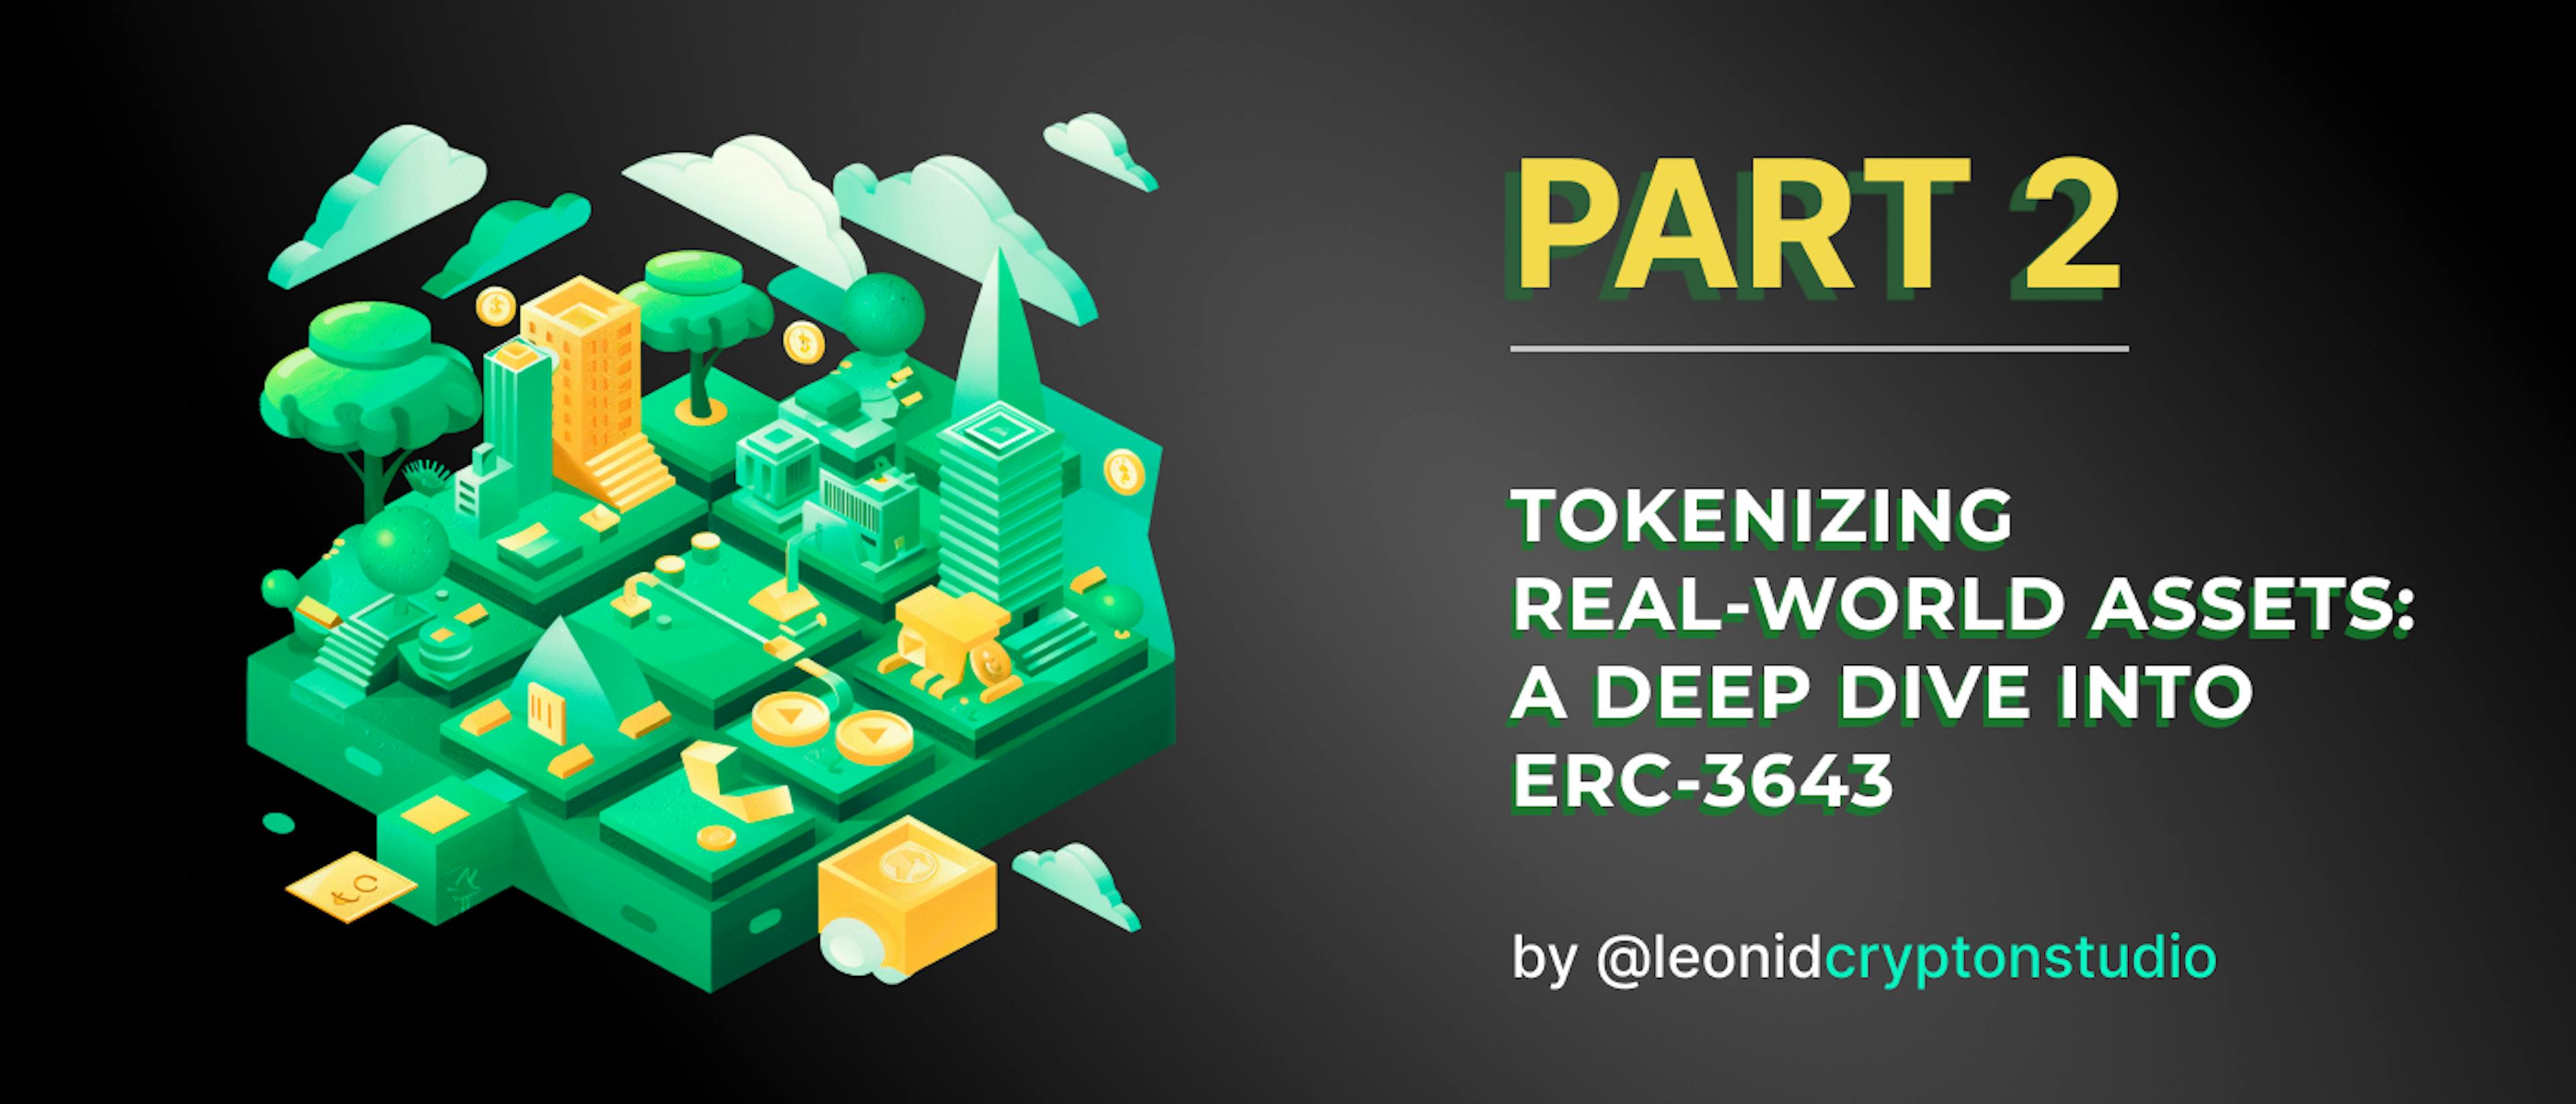 featured image - Tokenizing Real-World Assets (RWA) Part 2: A Deeper Dive Into ERC-3643